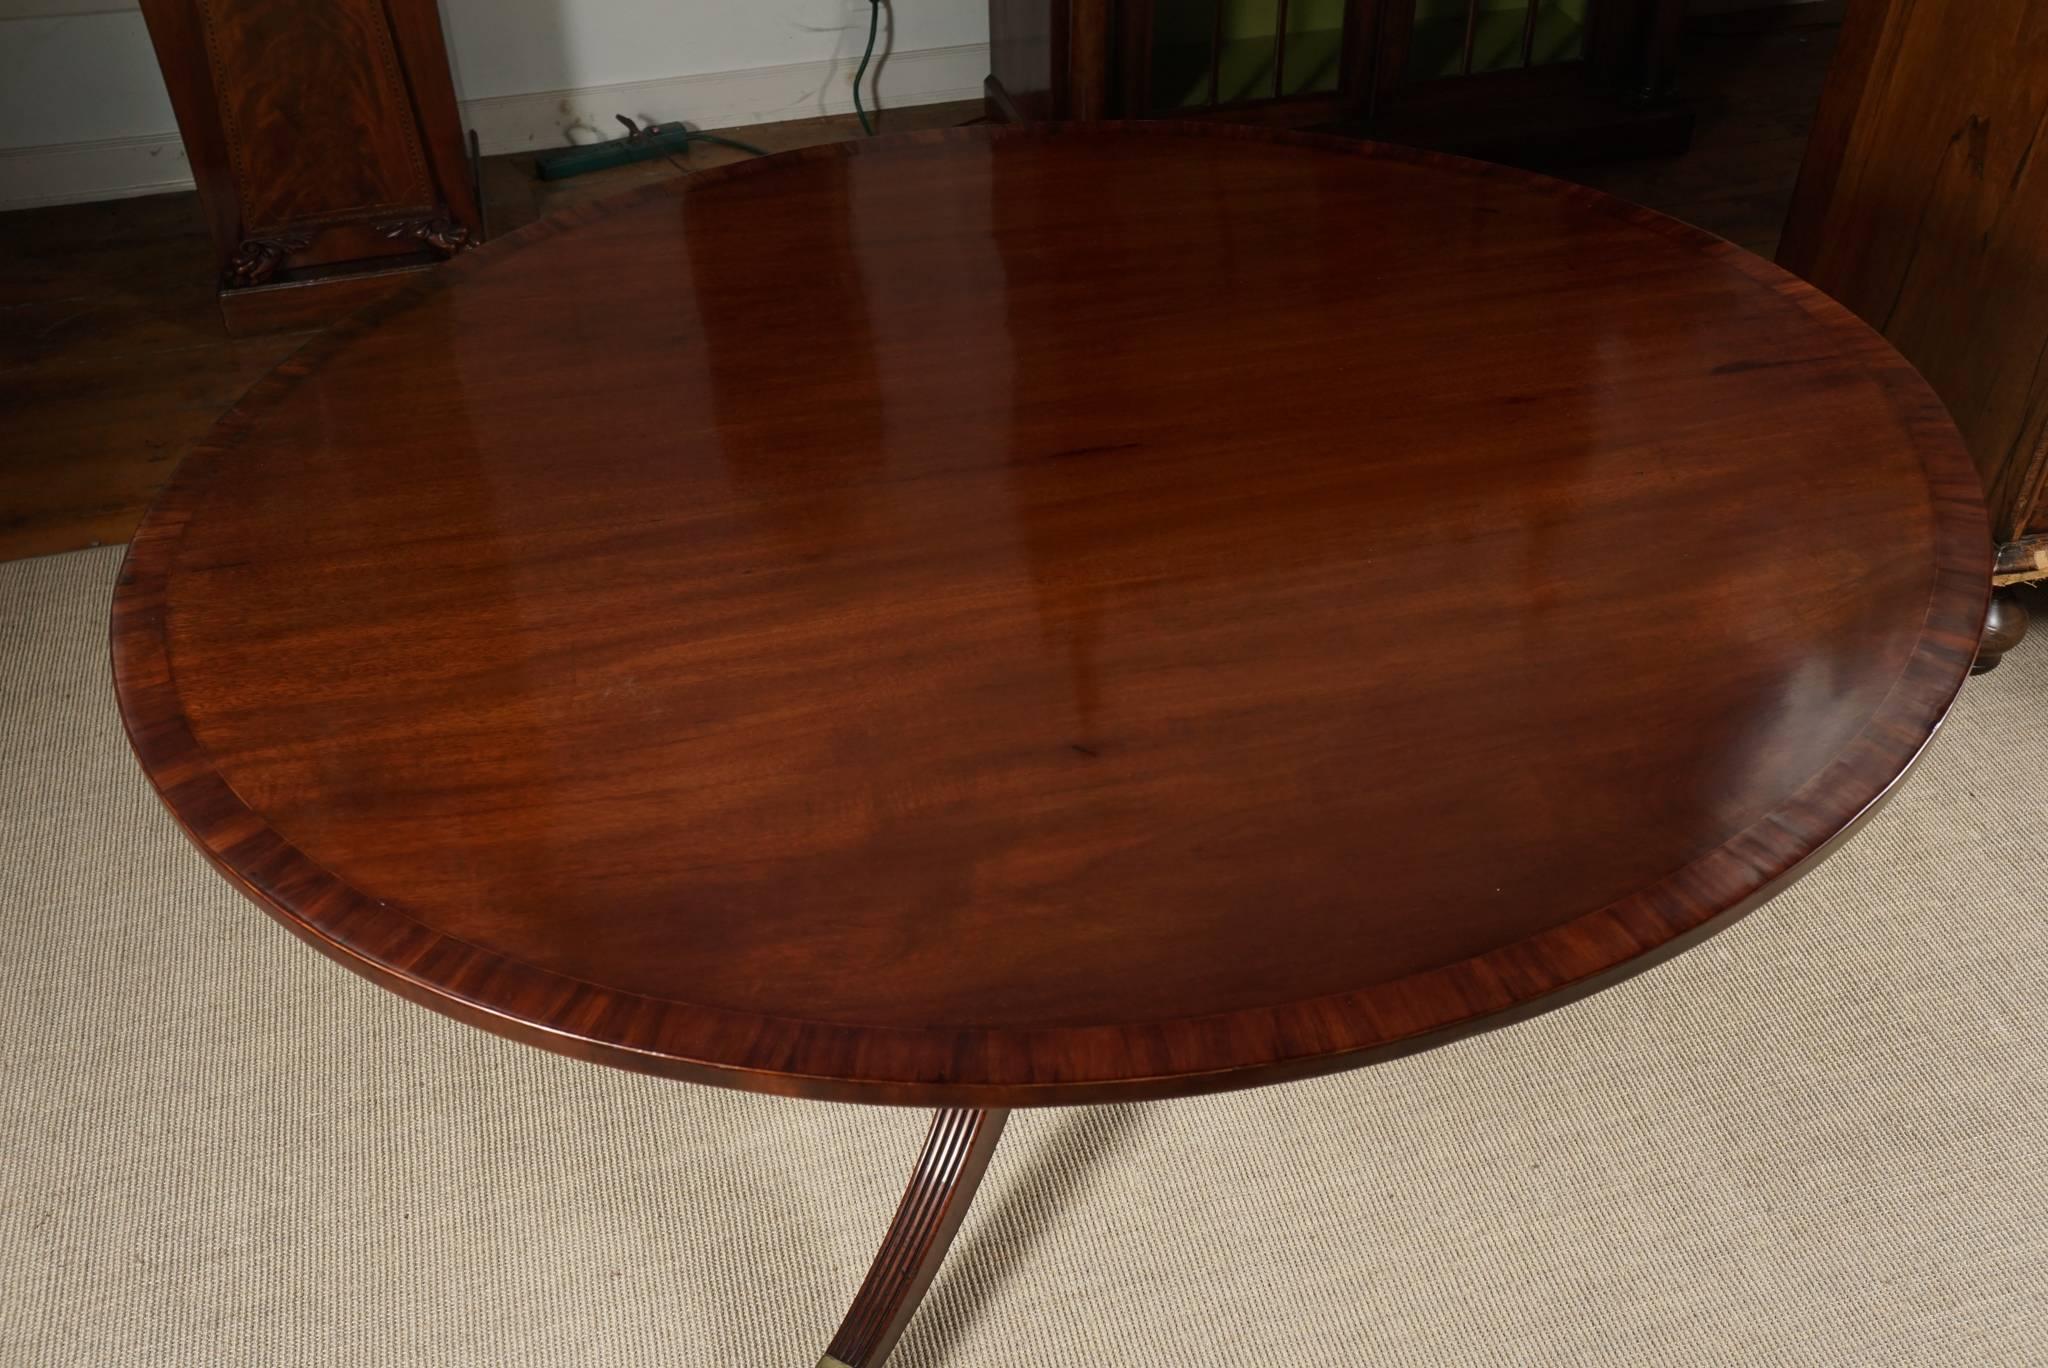 Nice English 18th century mahogany oval tilt-top breakfast or dining table. Crossbanded top. Great color and proportions. On a turned stem with three down swept legs ending in brass cap toes and casters, circa 1790.